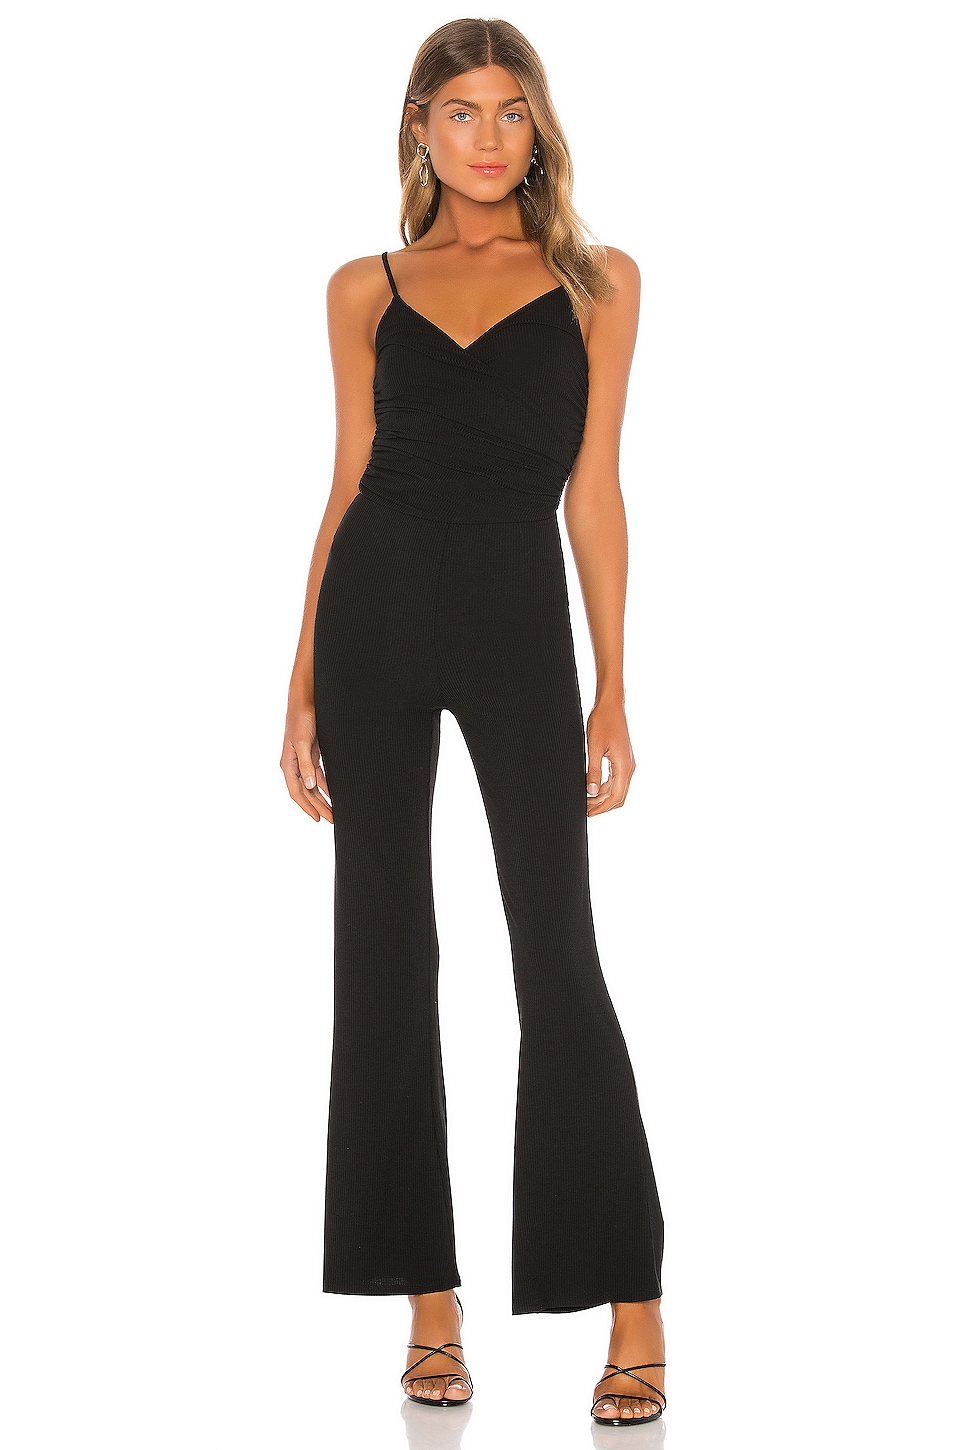 Lovers and Friends Morningside Jumpsuit in Black | REVOLVE